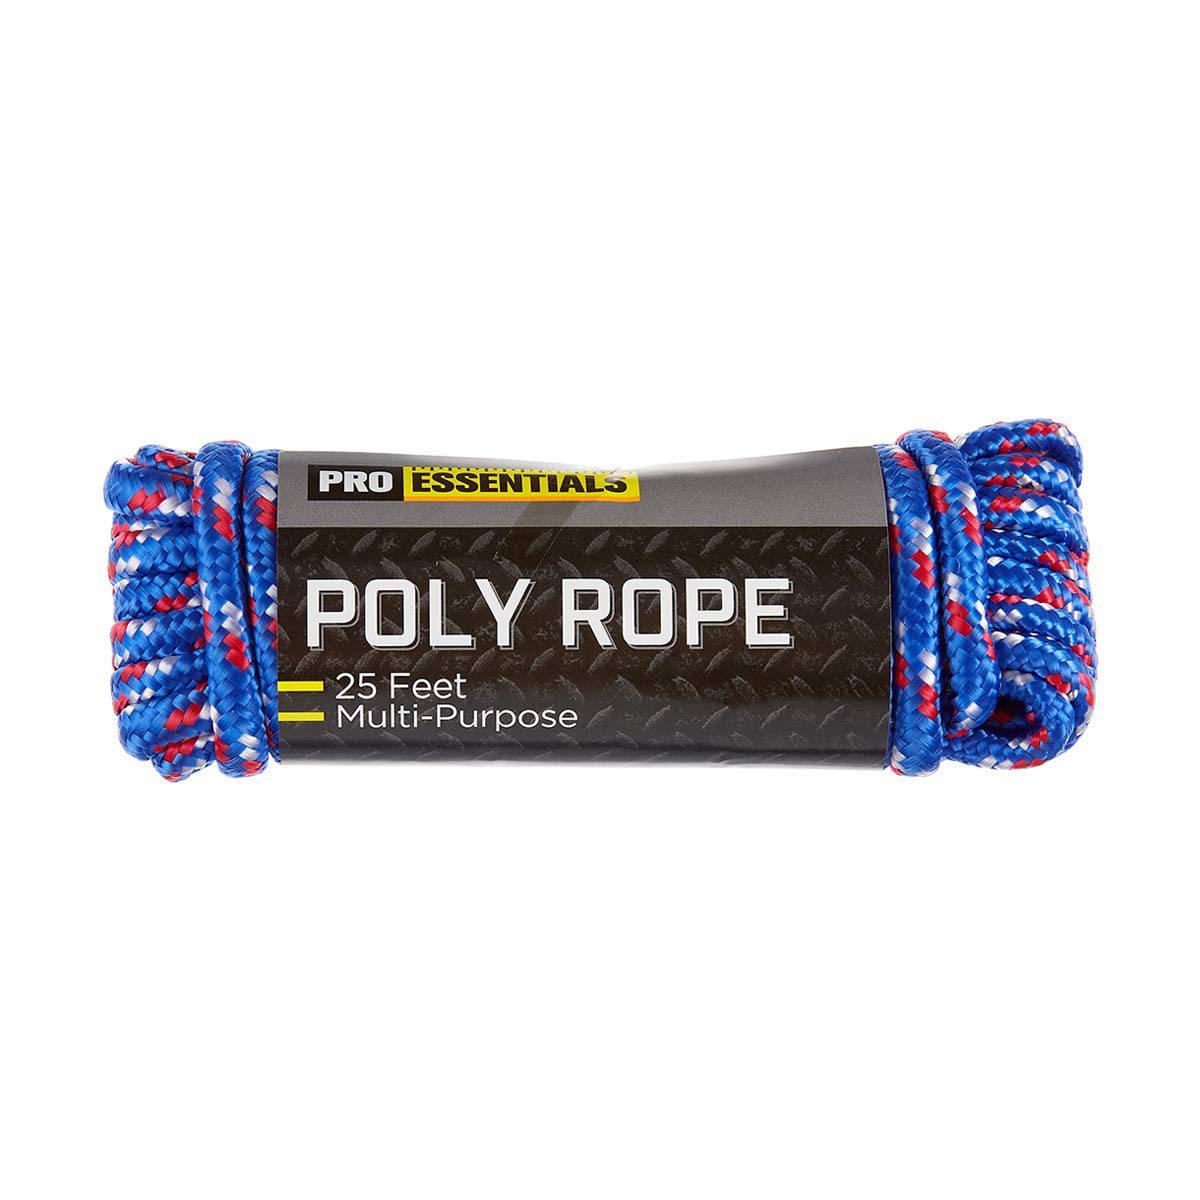 Pro Essentials Poly Rope, 25 Feet